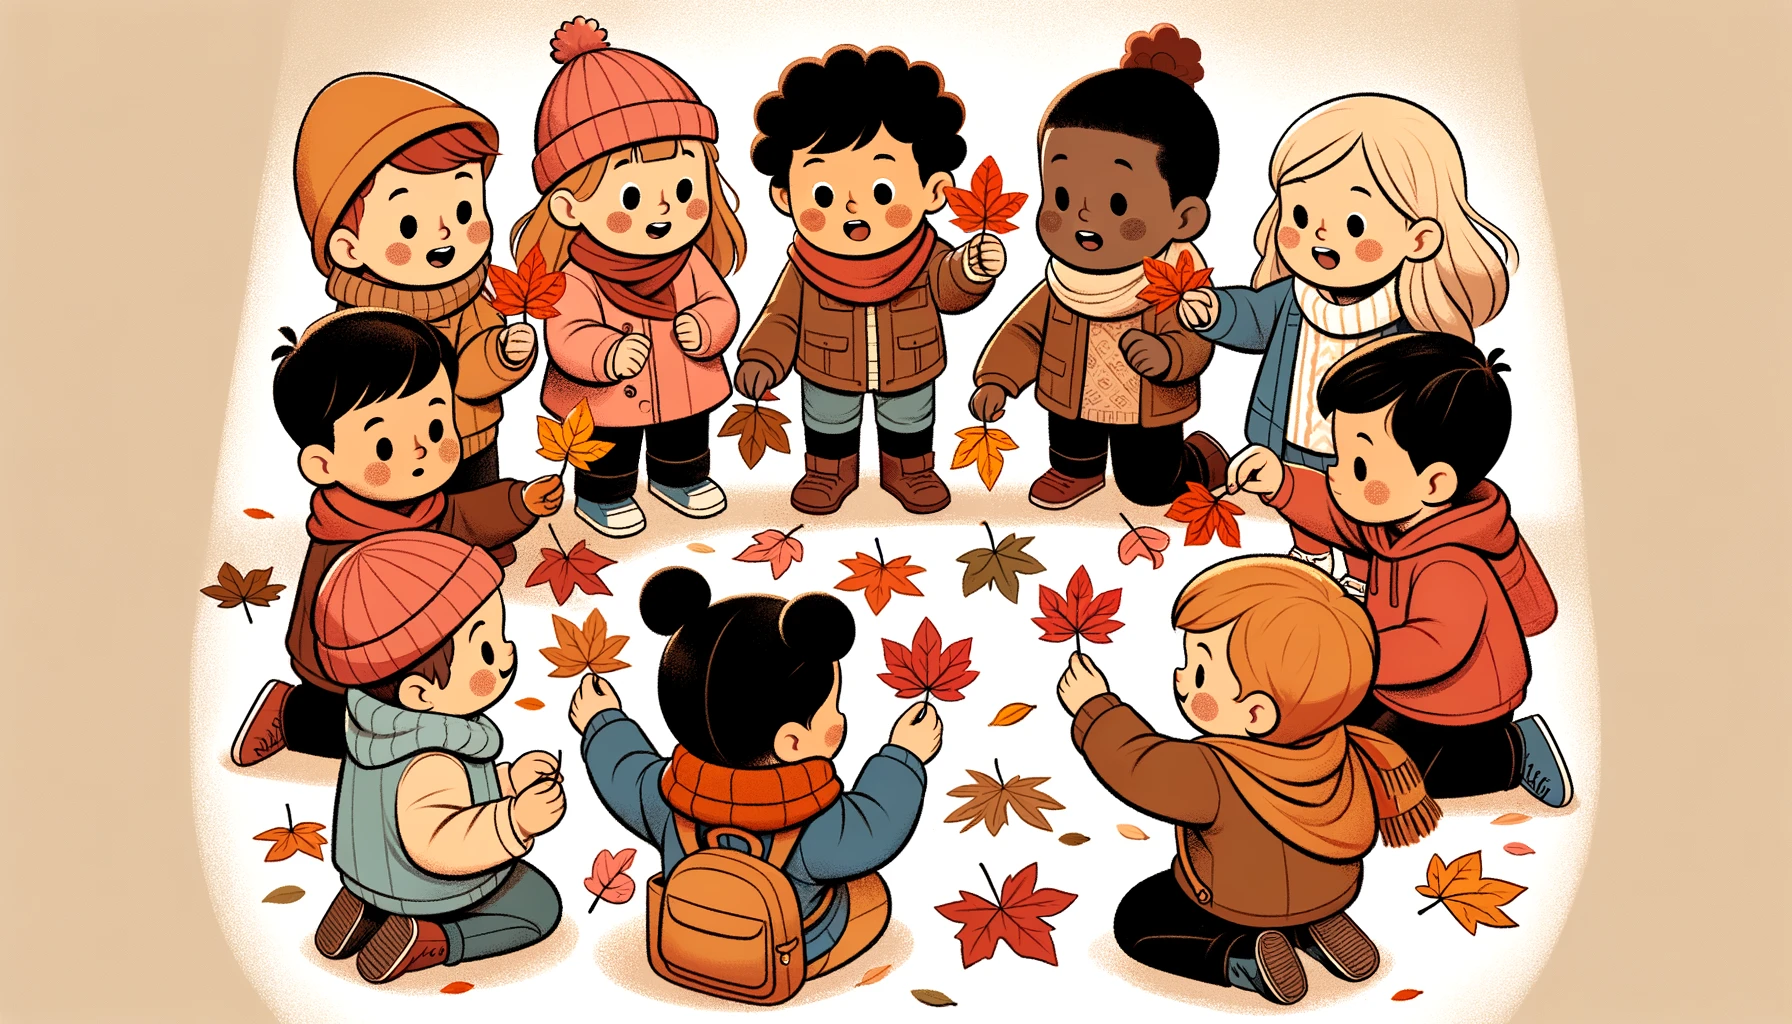 An illustration of preschool children playing a leaf matching game with different color autumn leaves. The scene depicts a diverse group of children engaged in an educational game. They are outdoors, surrounded by the warm hues of fall. The kids are depicted with excitement and curiosity as they hold up leaves, comparing the vibrant reds, oranges, and yellows to find matches. 